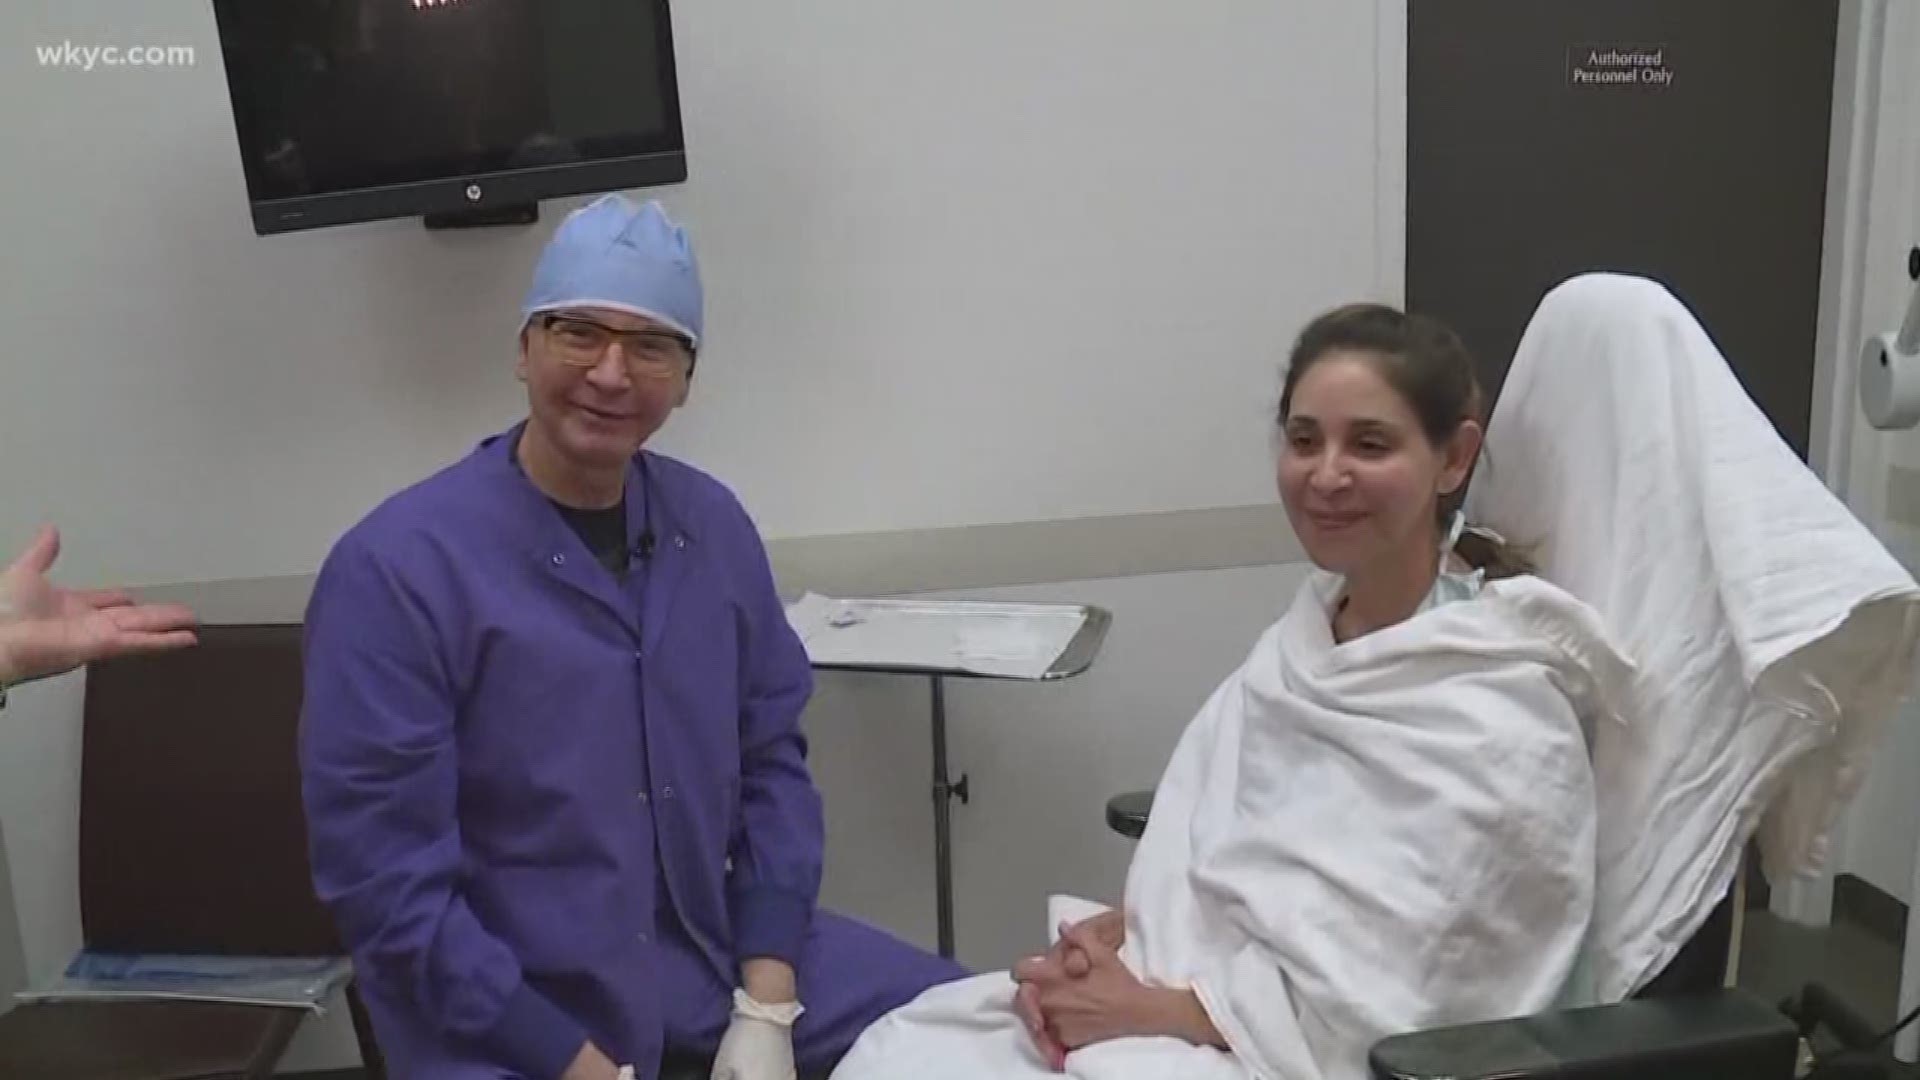 Meet patient Gloria Roman and Dr. Michael Wojtanowski, who have agreed to let us stream their facelift surgery live on our website.